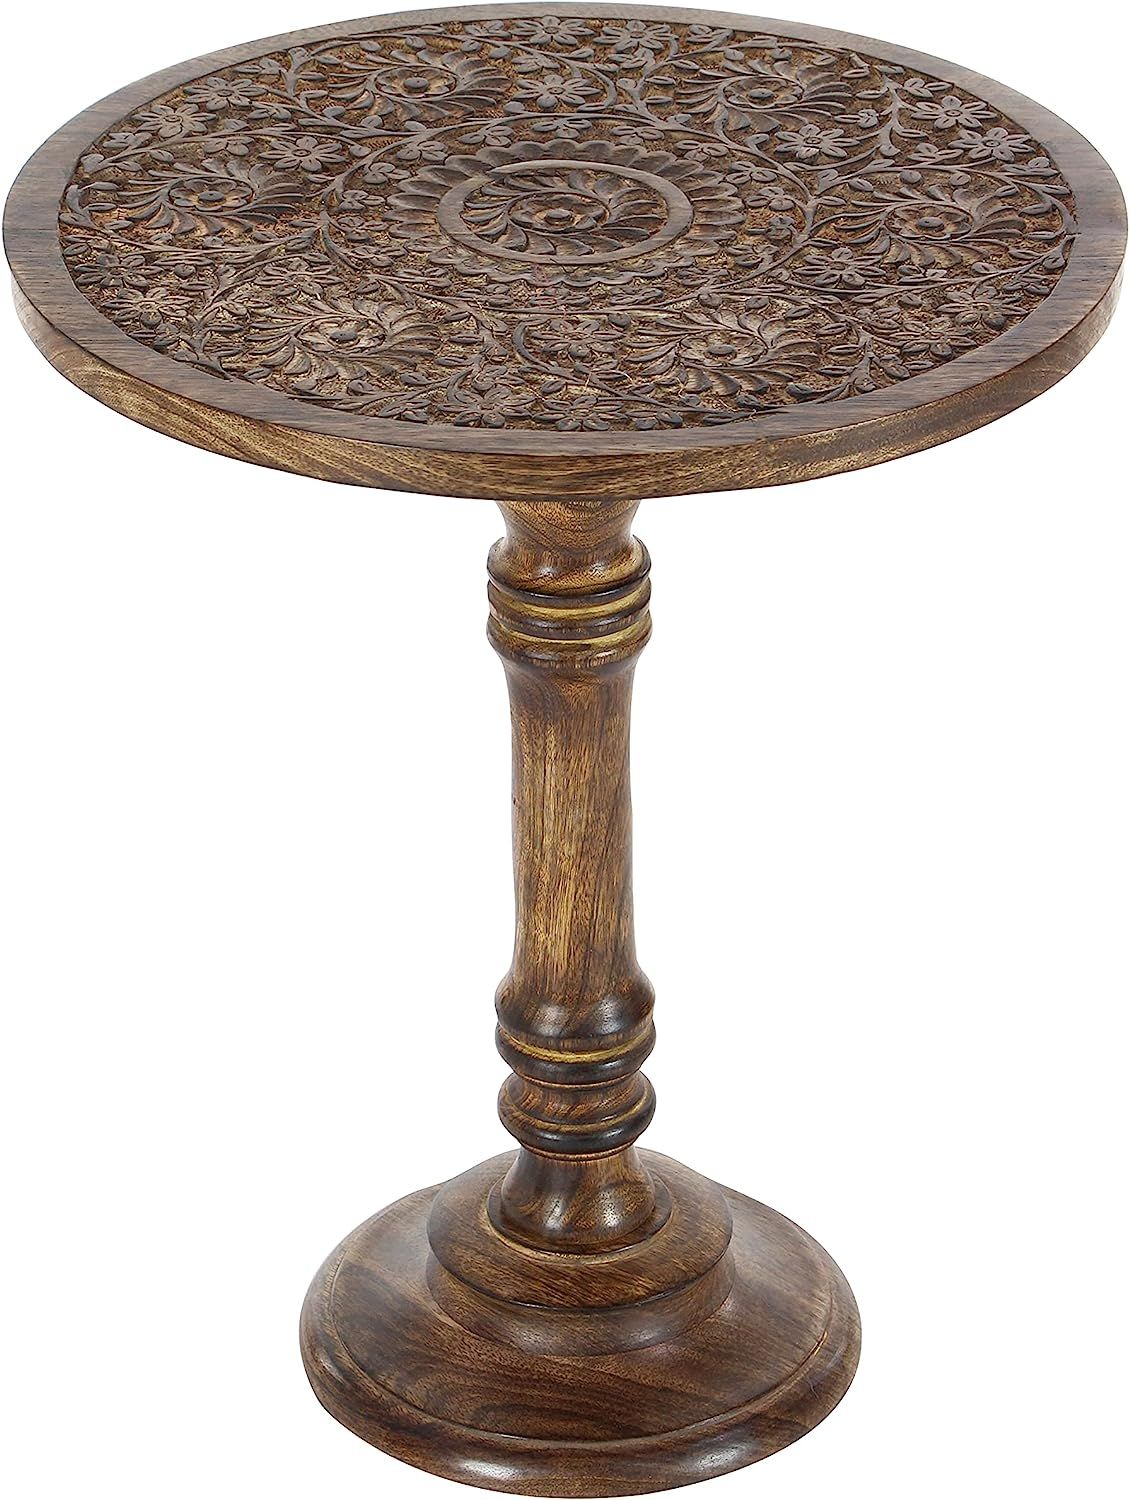 Deco 79 Mango Wood Carved Floral Accent Table, 17" x 17" x 21", Dark Brown | Amazon (US)